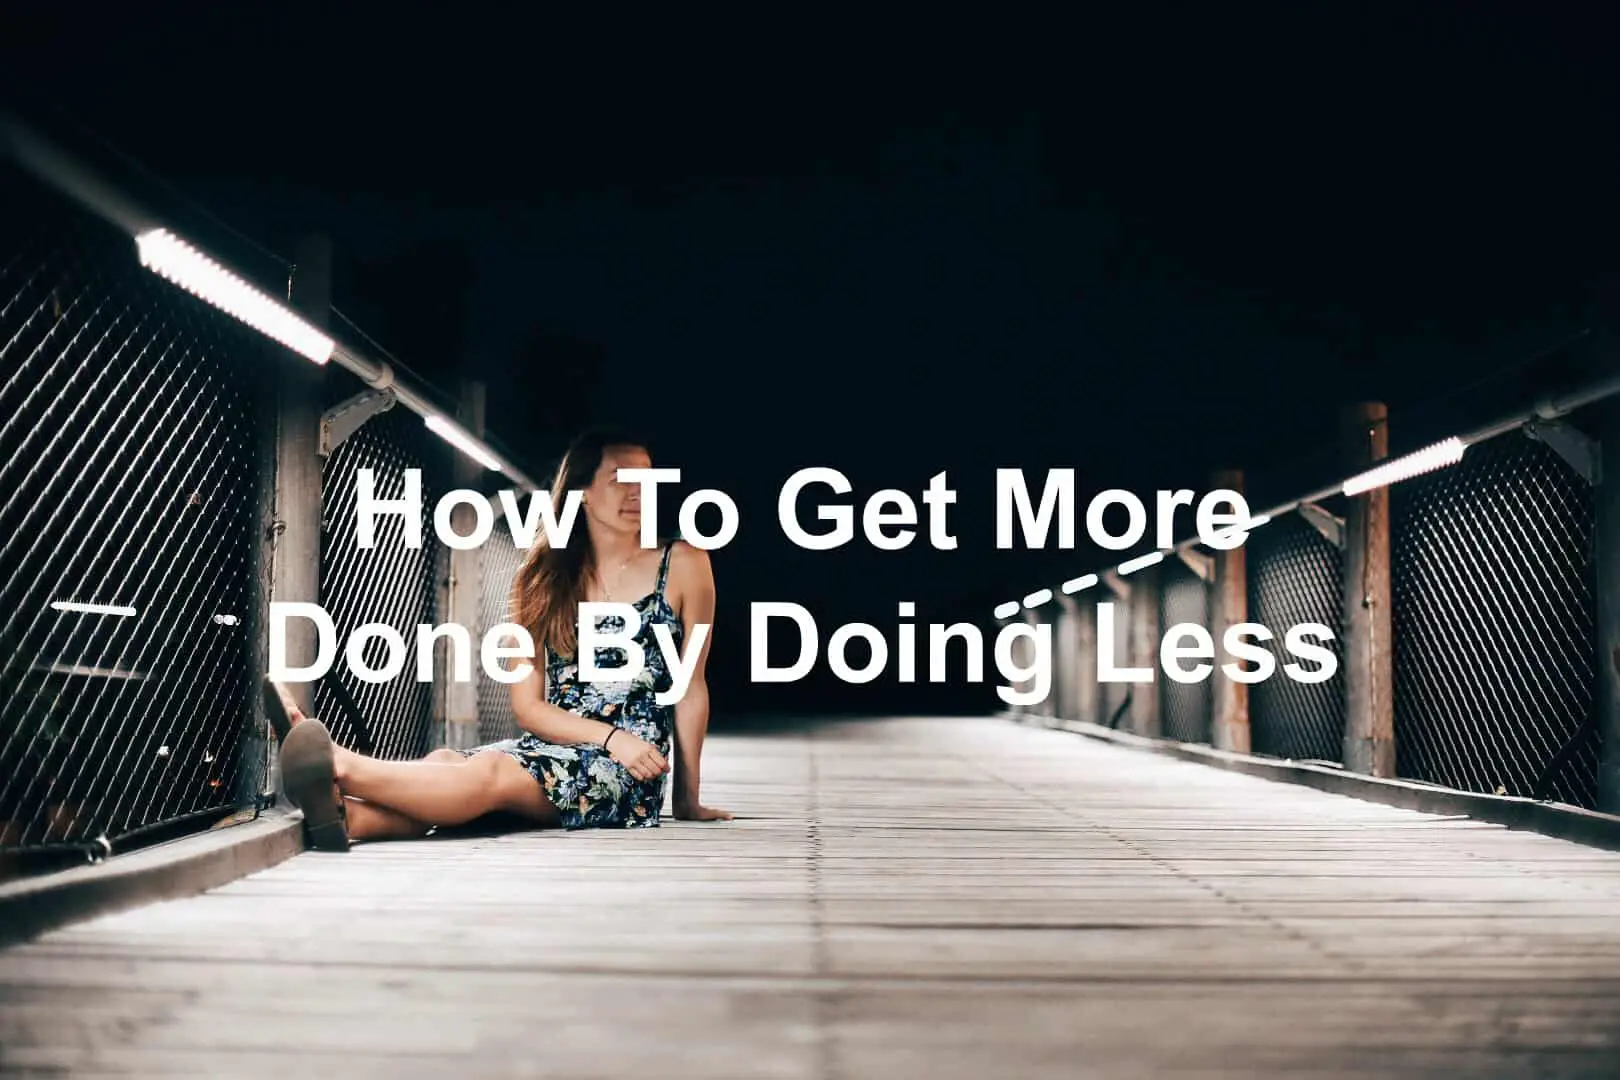 Do less, get more done